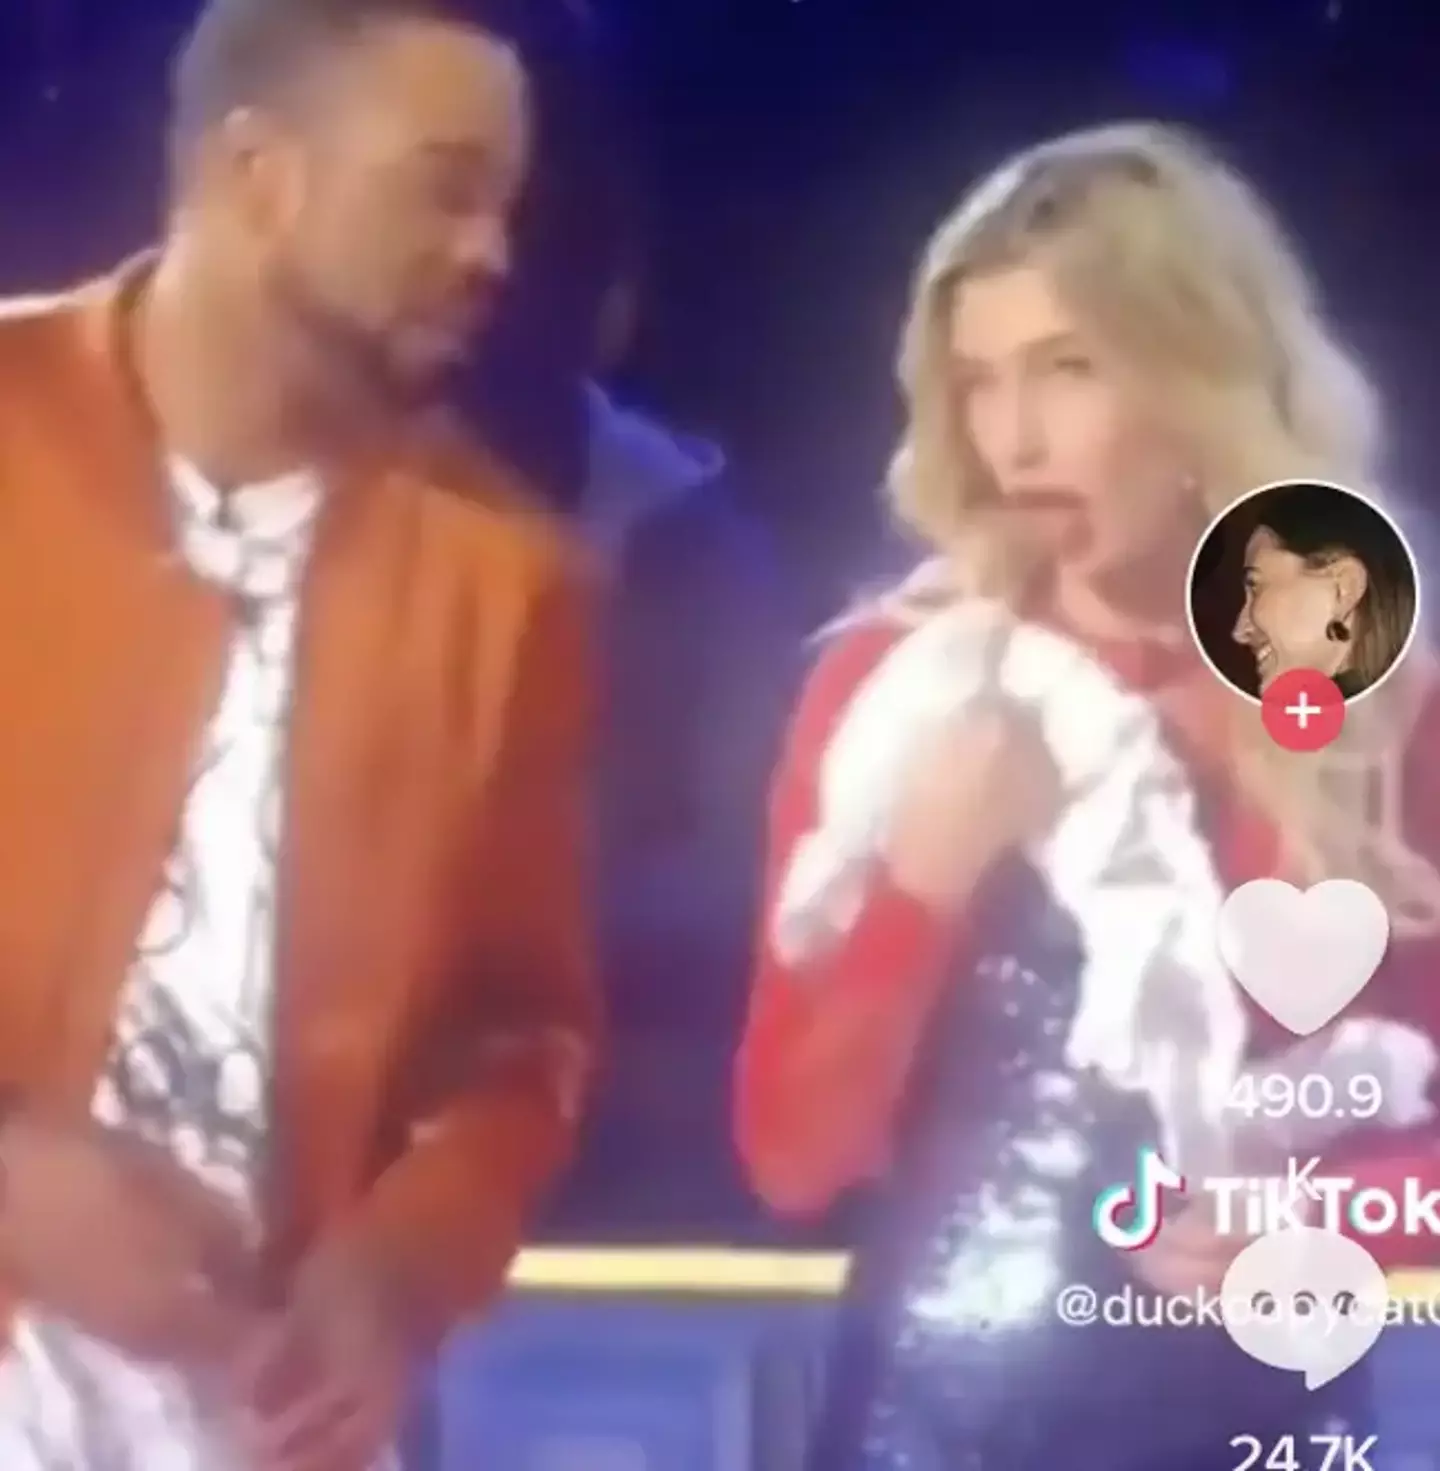 Hailey pretended to gag as Method Man mentioned Swift.